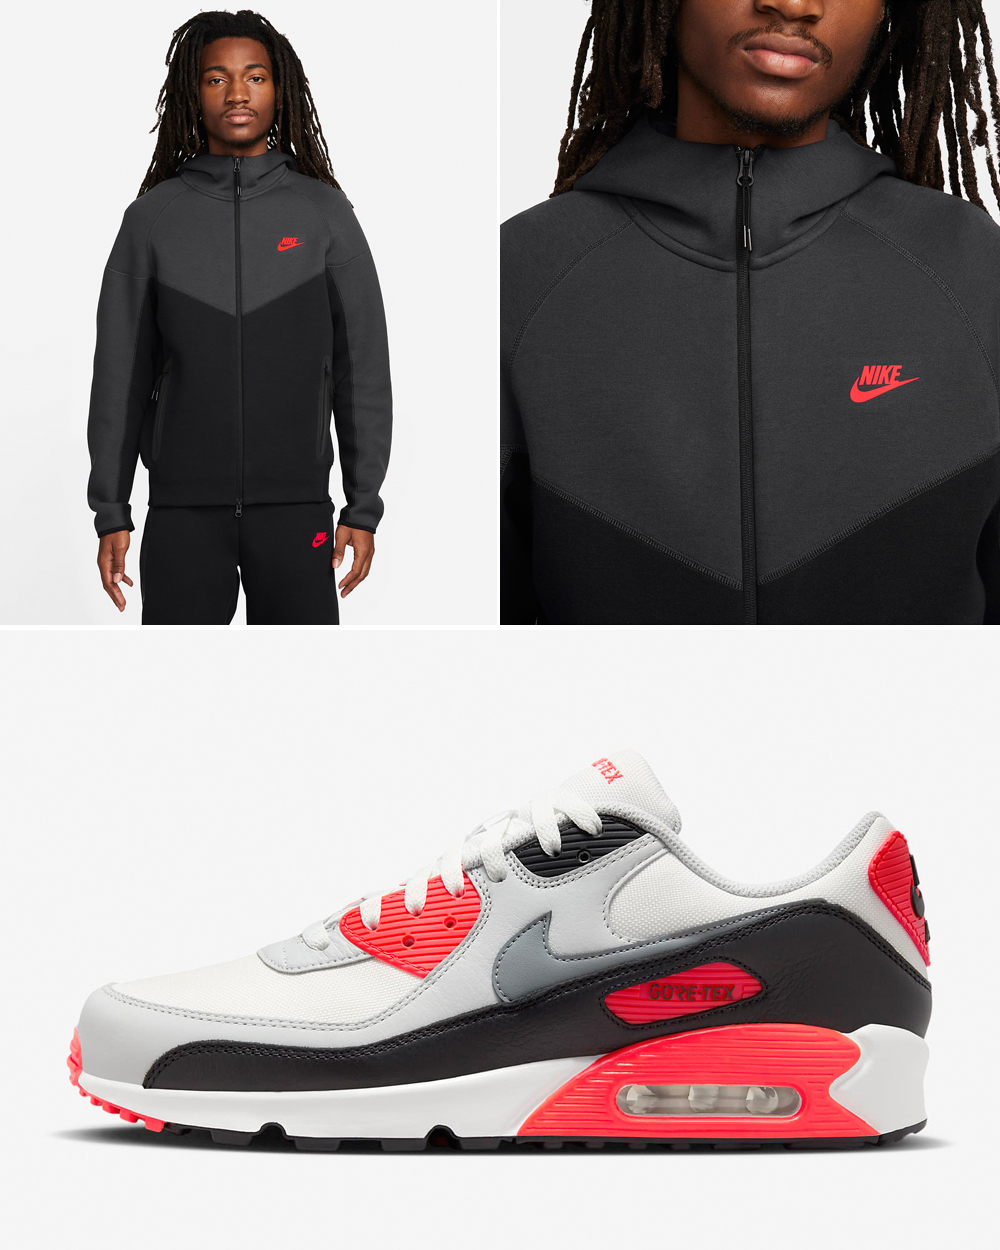 Nike Air Max 90 Gore Tex Infrared Outfit